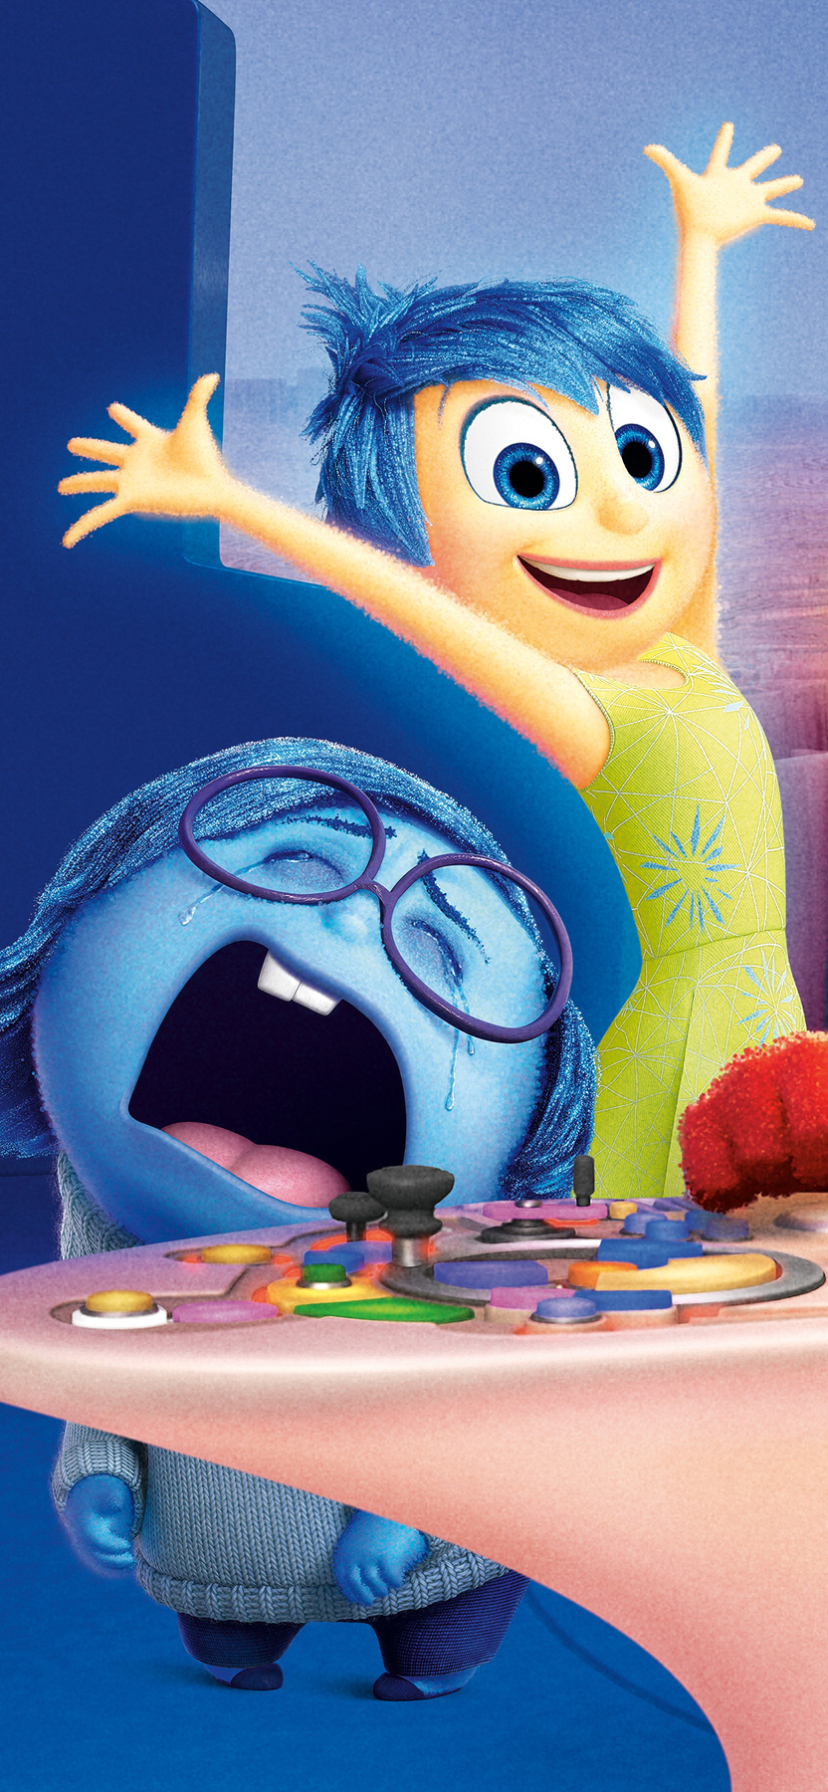 Inside Out Phone Wallpaper - Mobile Abyss